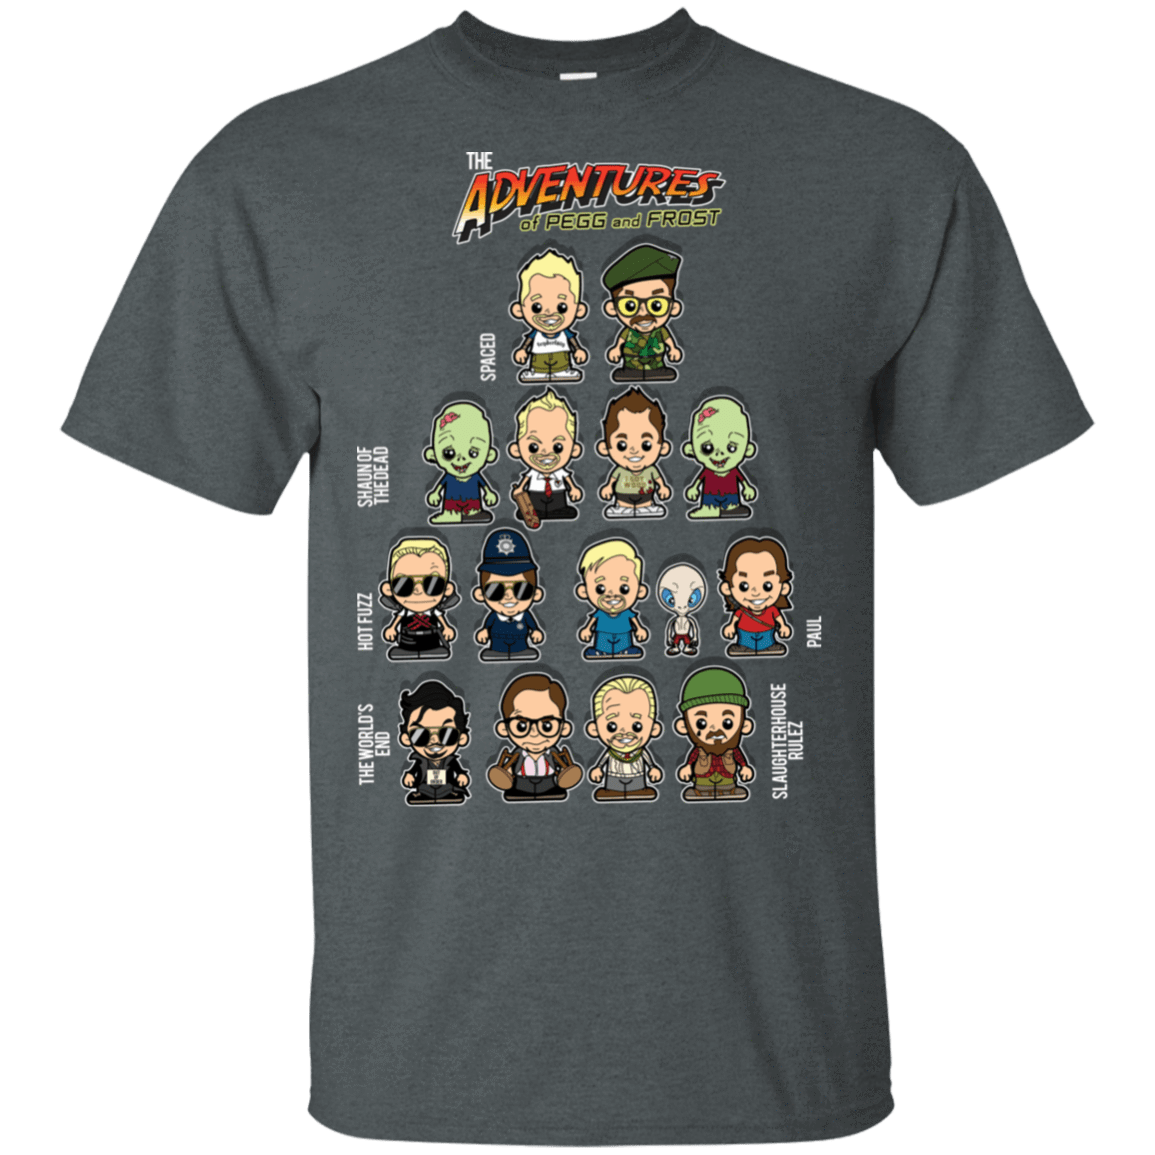 T-Shirts Dark Heather / S The Adventures of Pegg and Frost T-Shirt